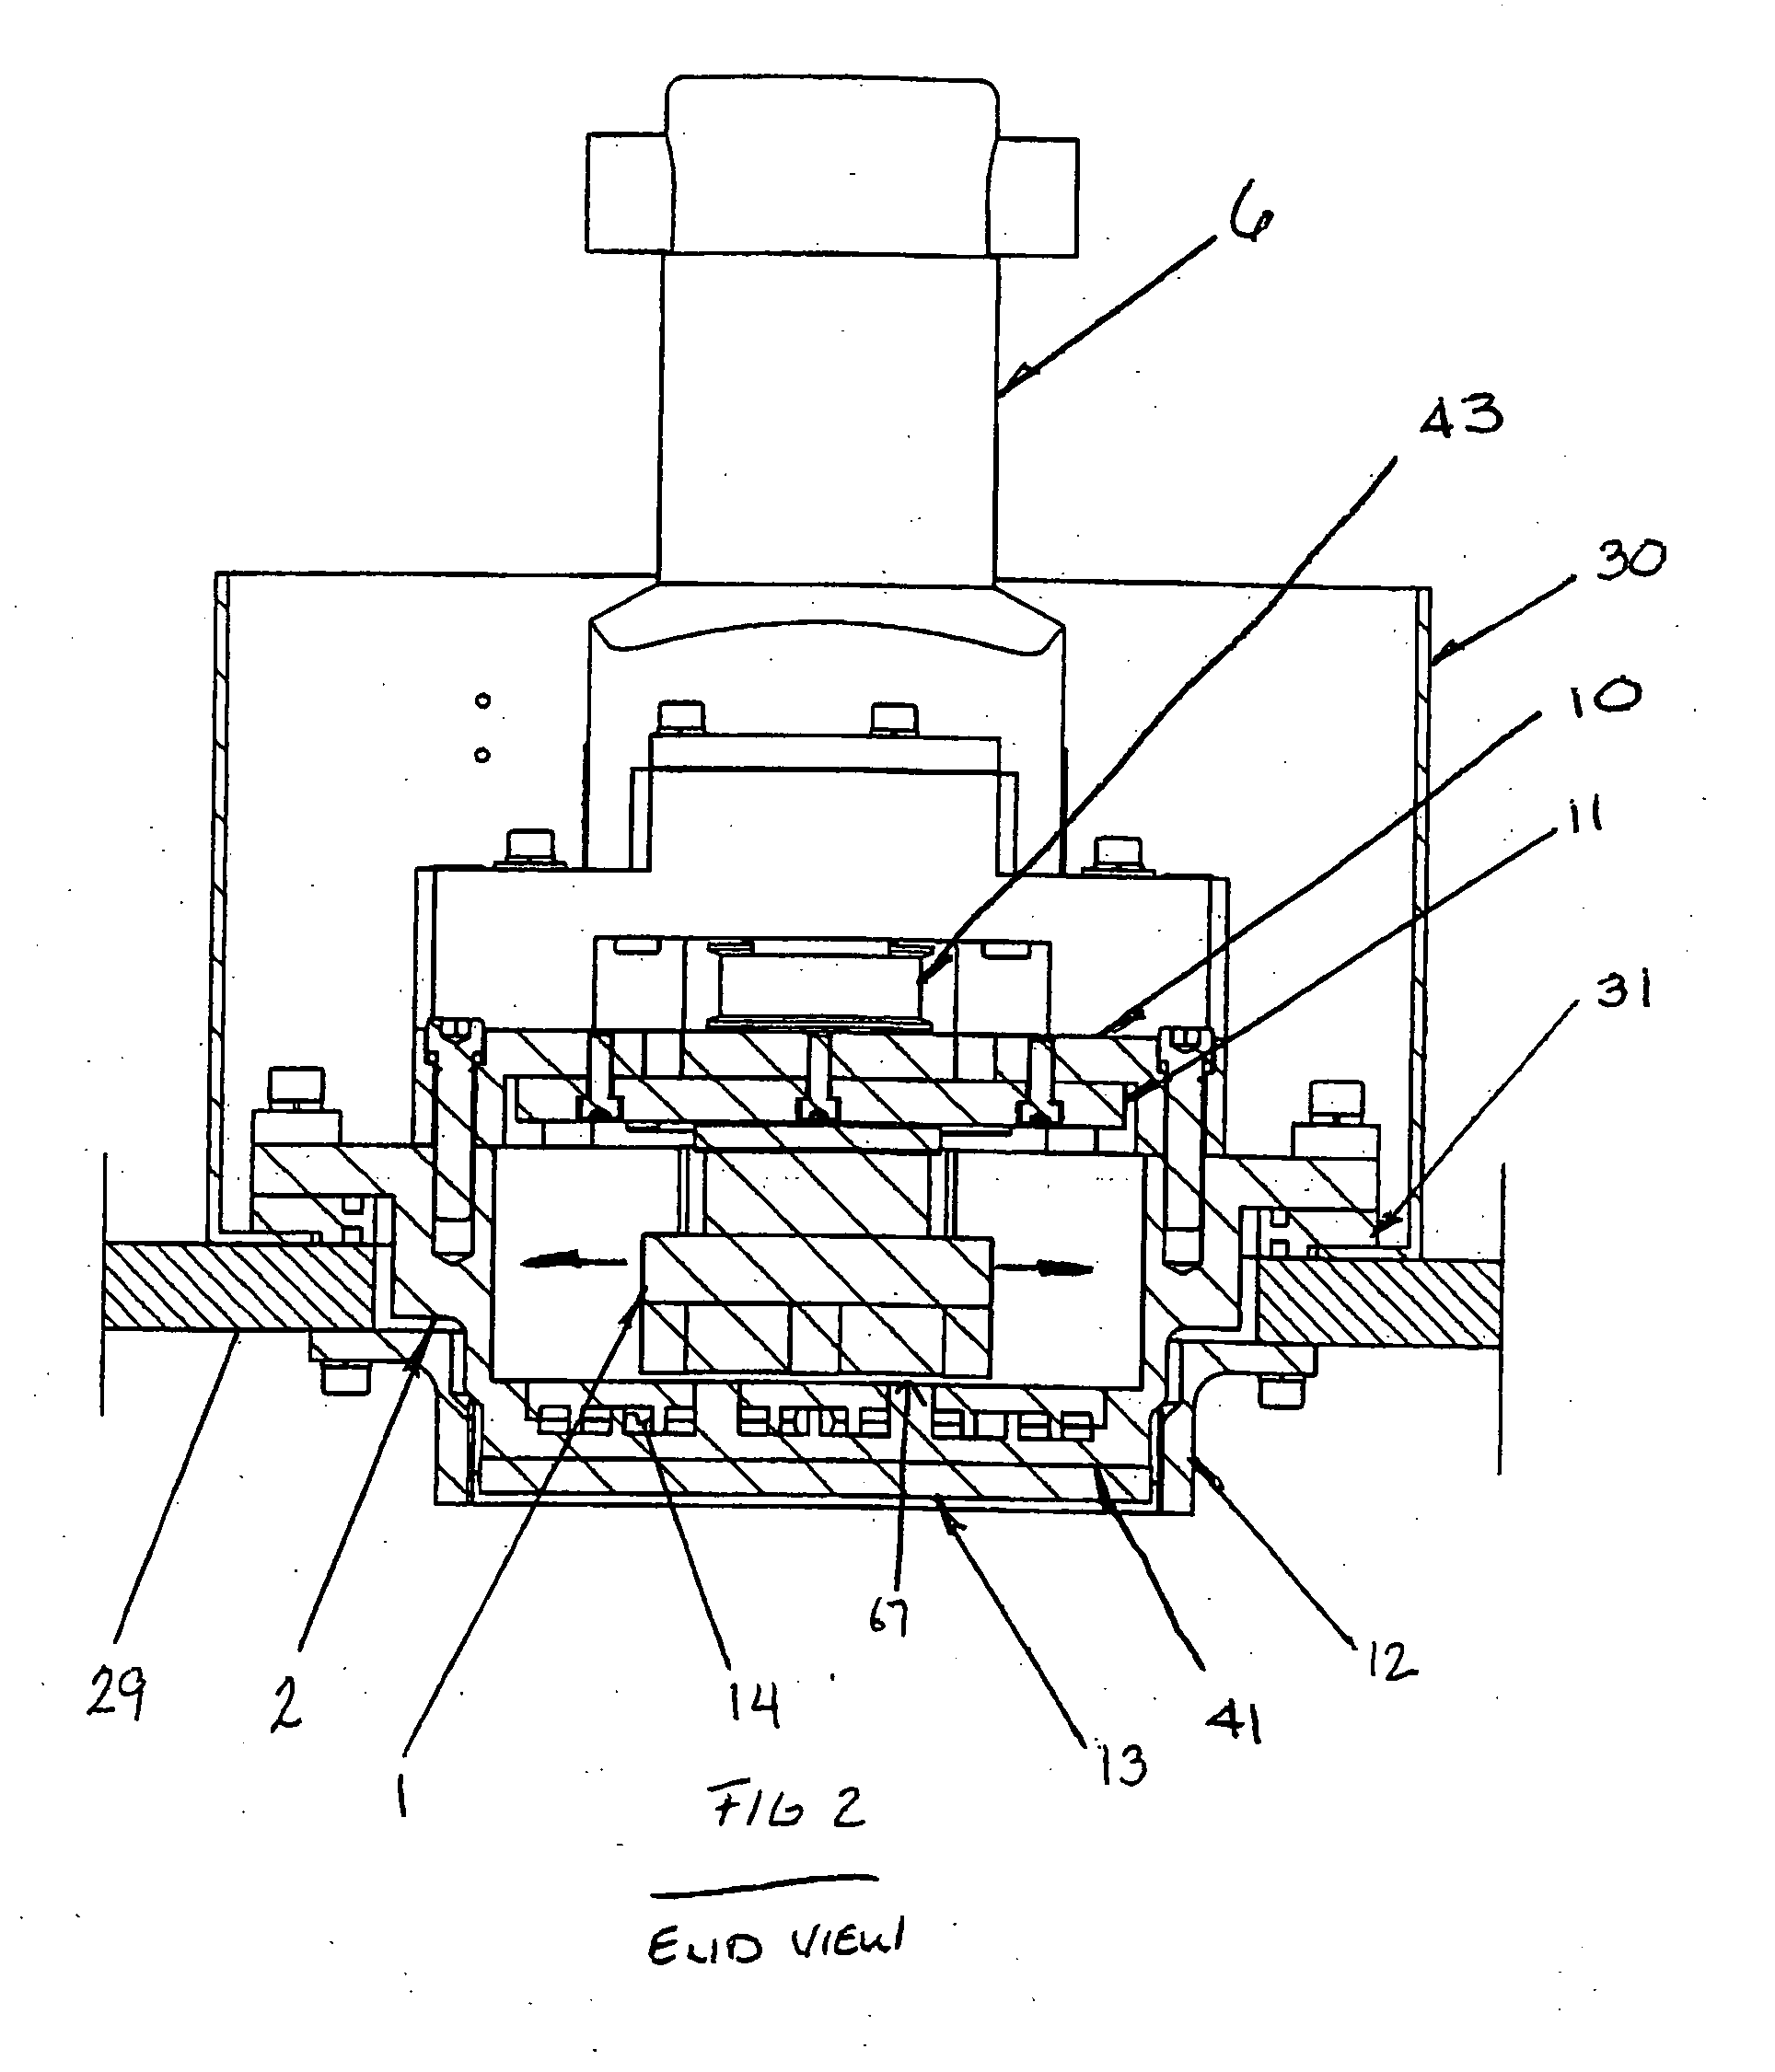 Linear sweeping magnetron sputtering cathode and scanning in-line system for arc-free reactive deposition and high target utilization